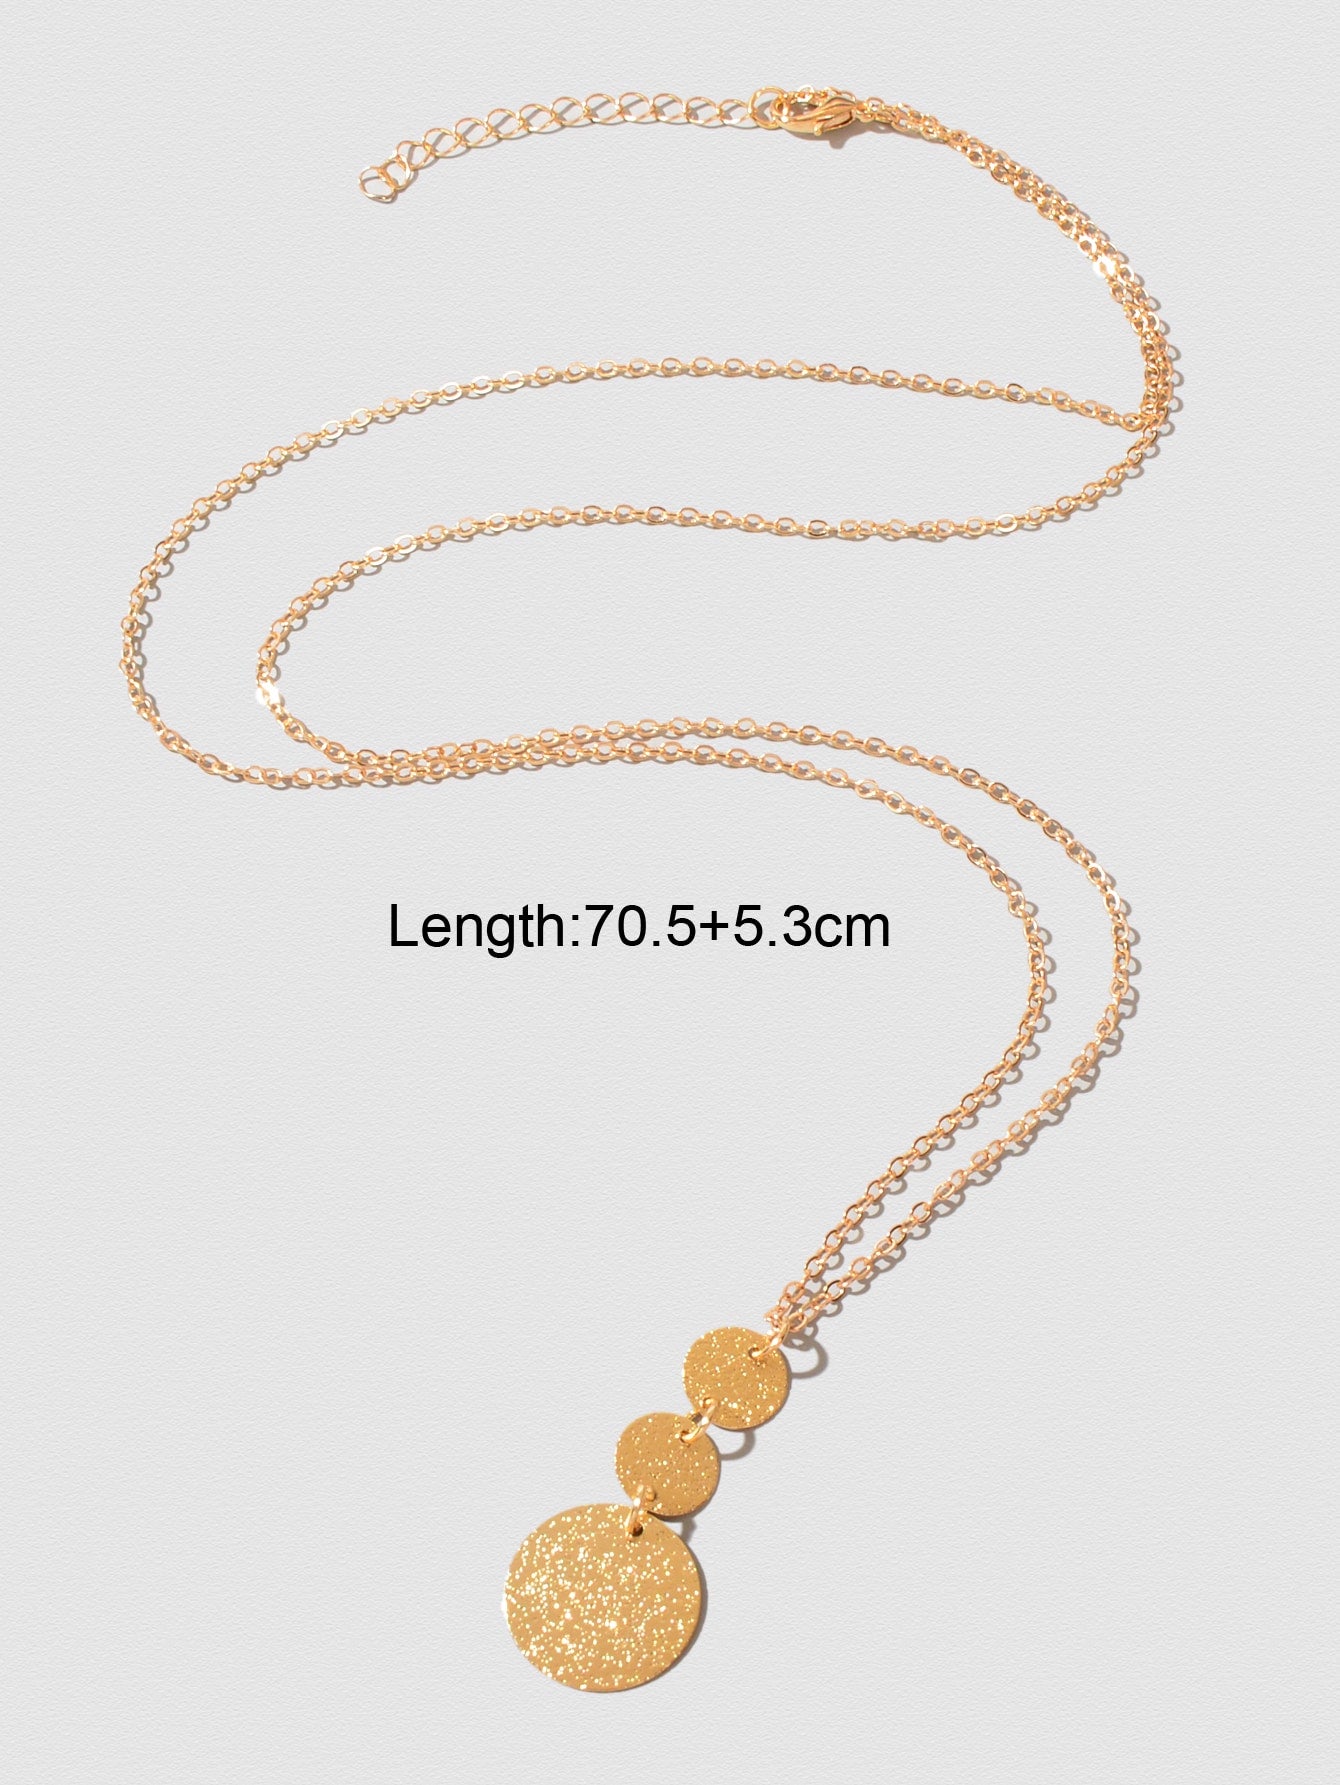 1Pc Fashion Disc Charm Necklace for Women for Daily Life